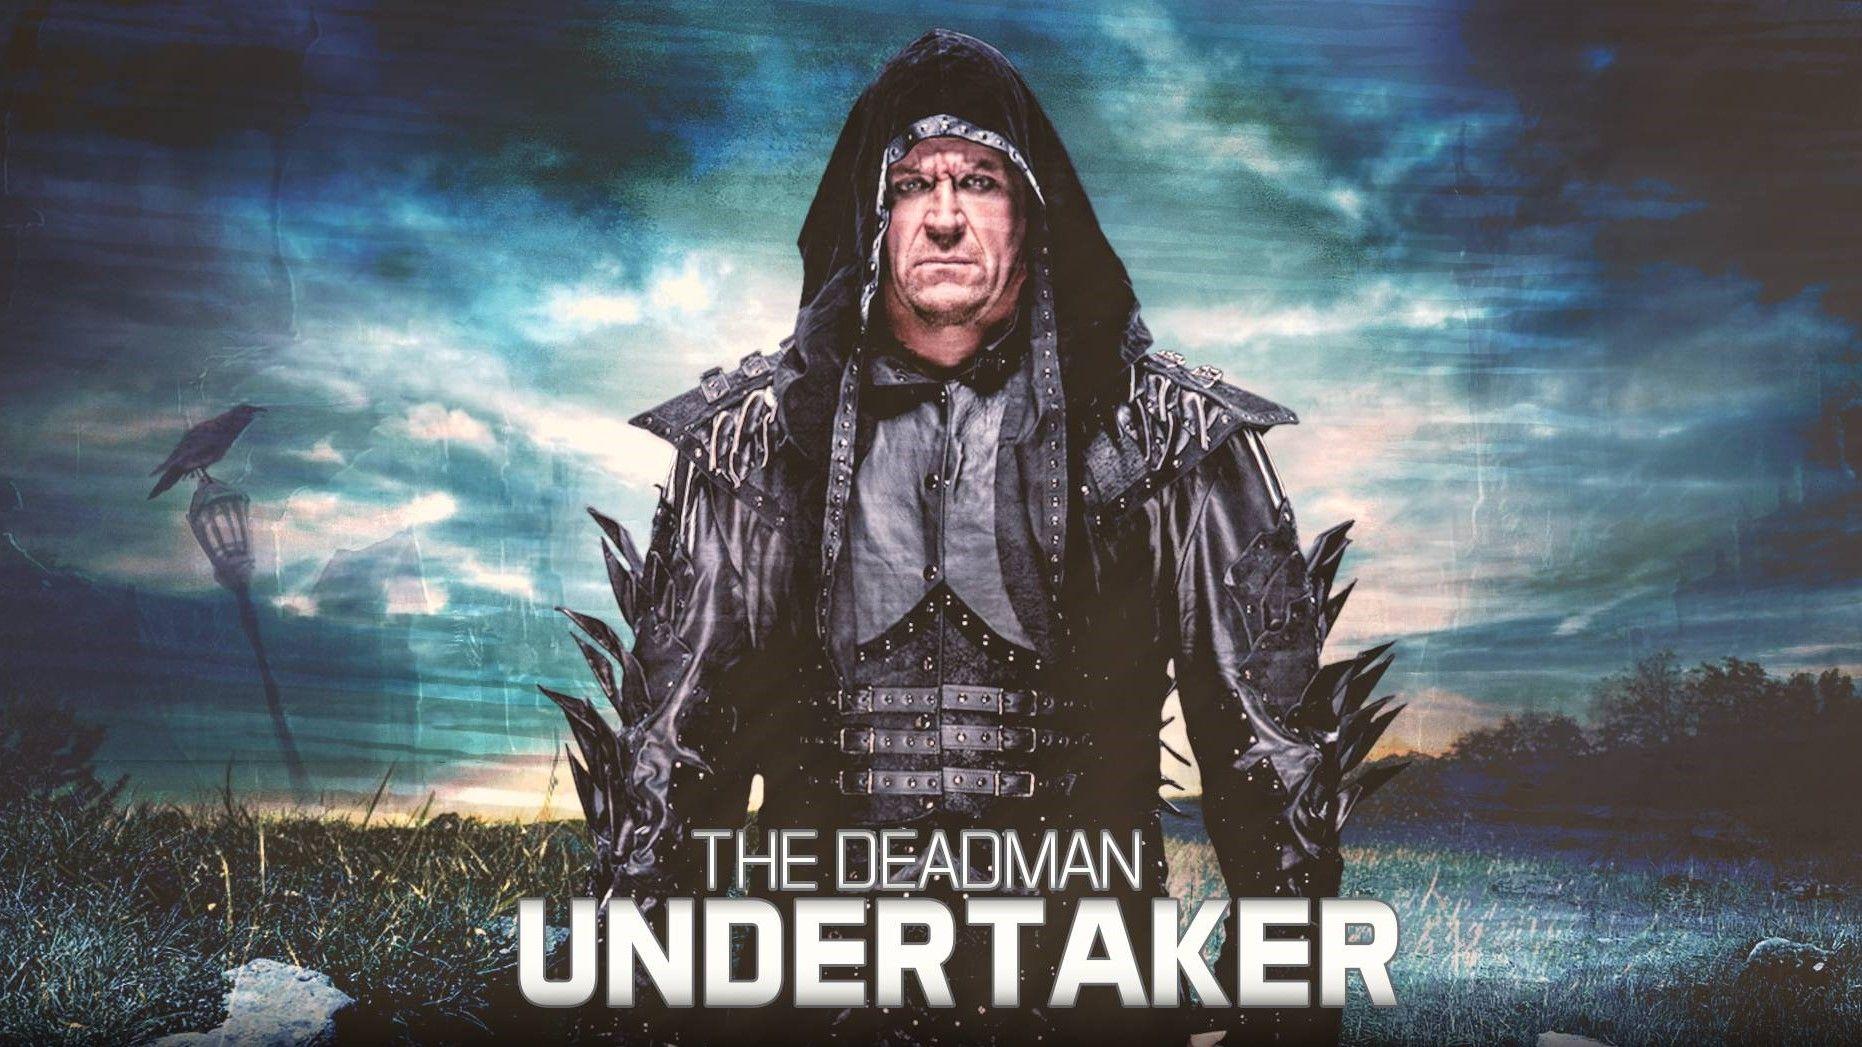 WWE Wrestler The Undertaker HD Photo Image and Wallpaper